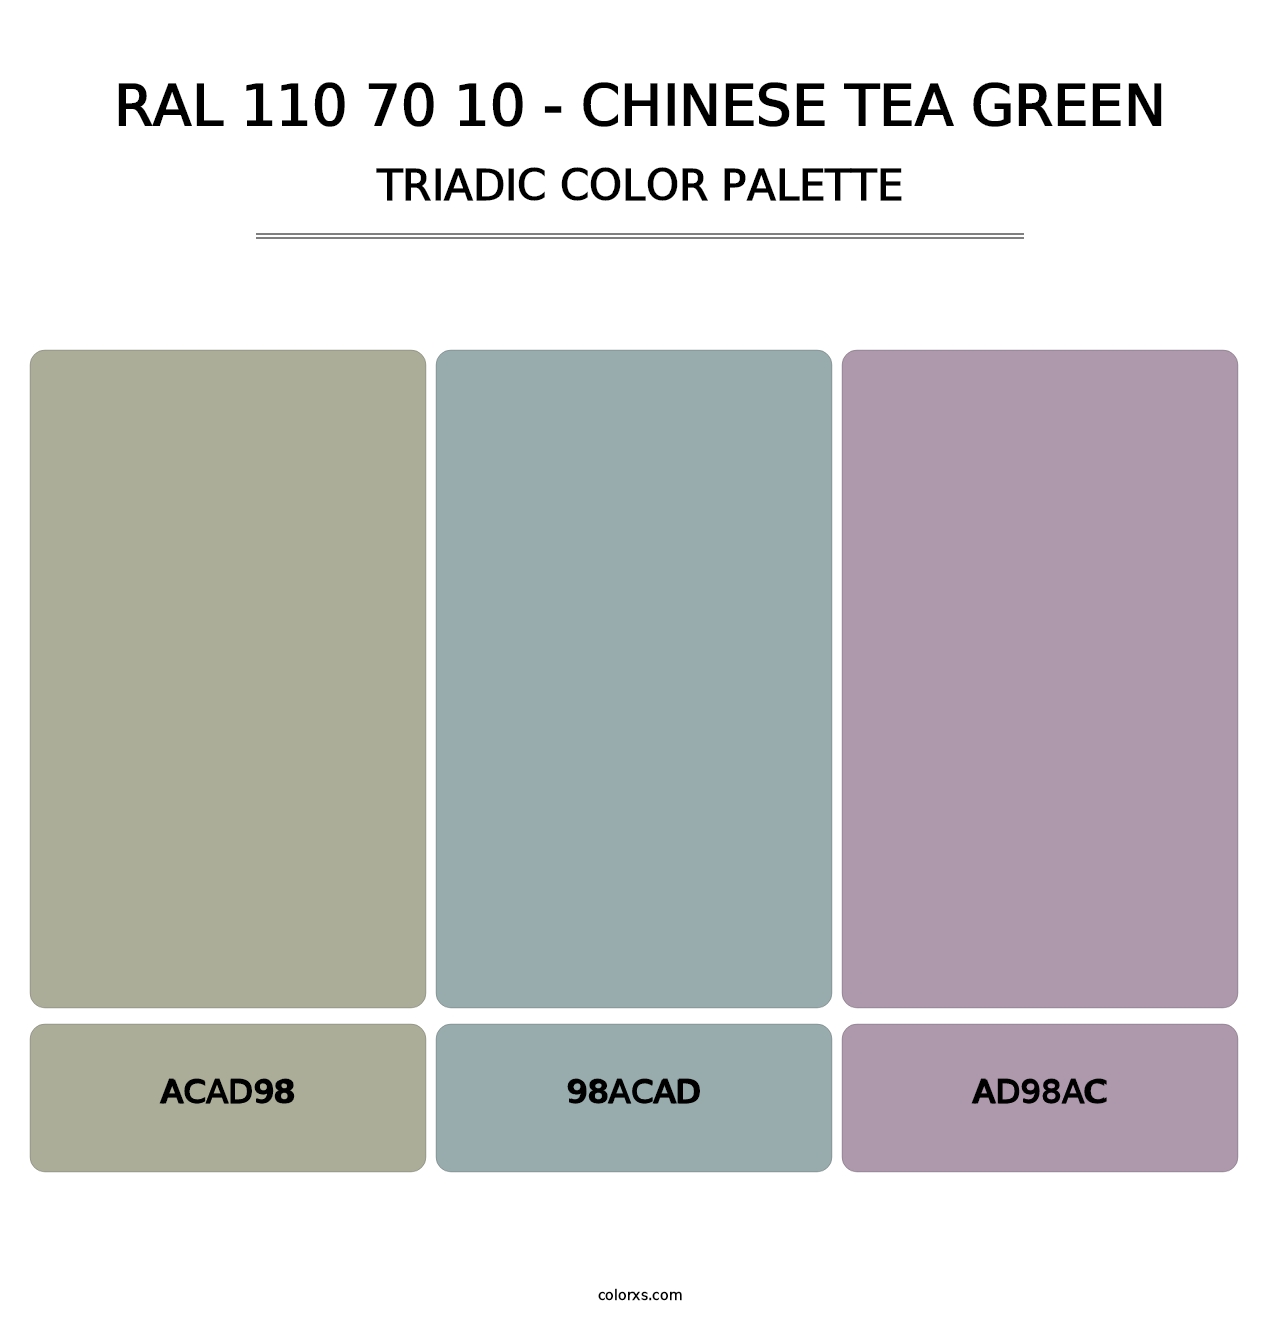 RAL 110 70 10 - Chinese Tea Green - Triadic Color Palette